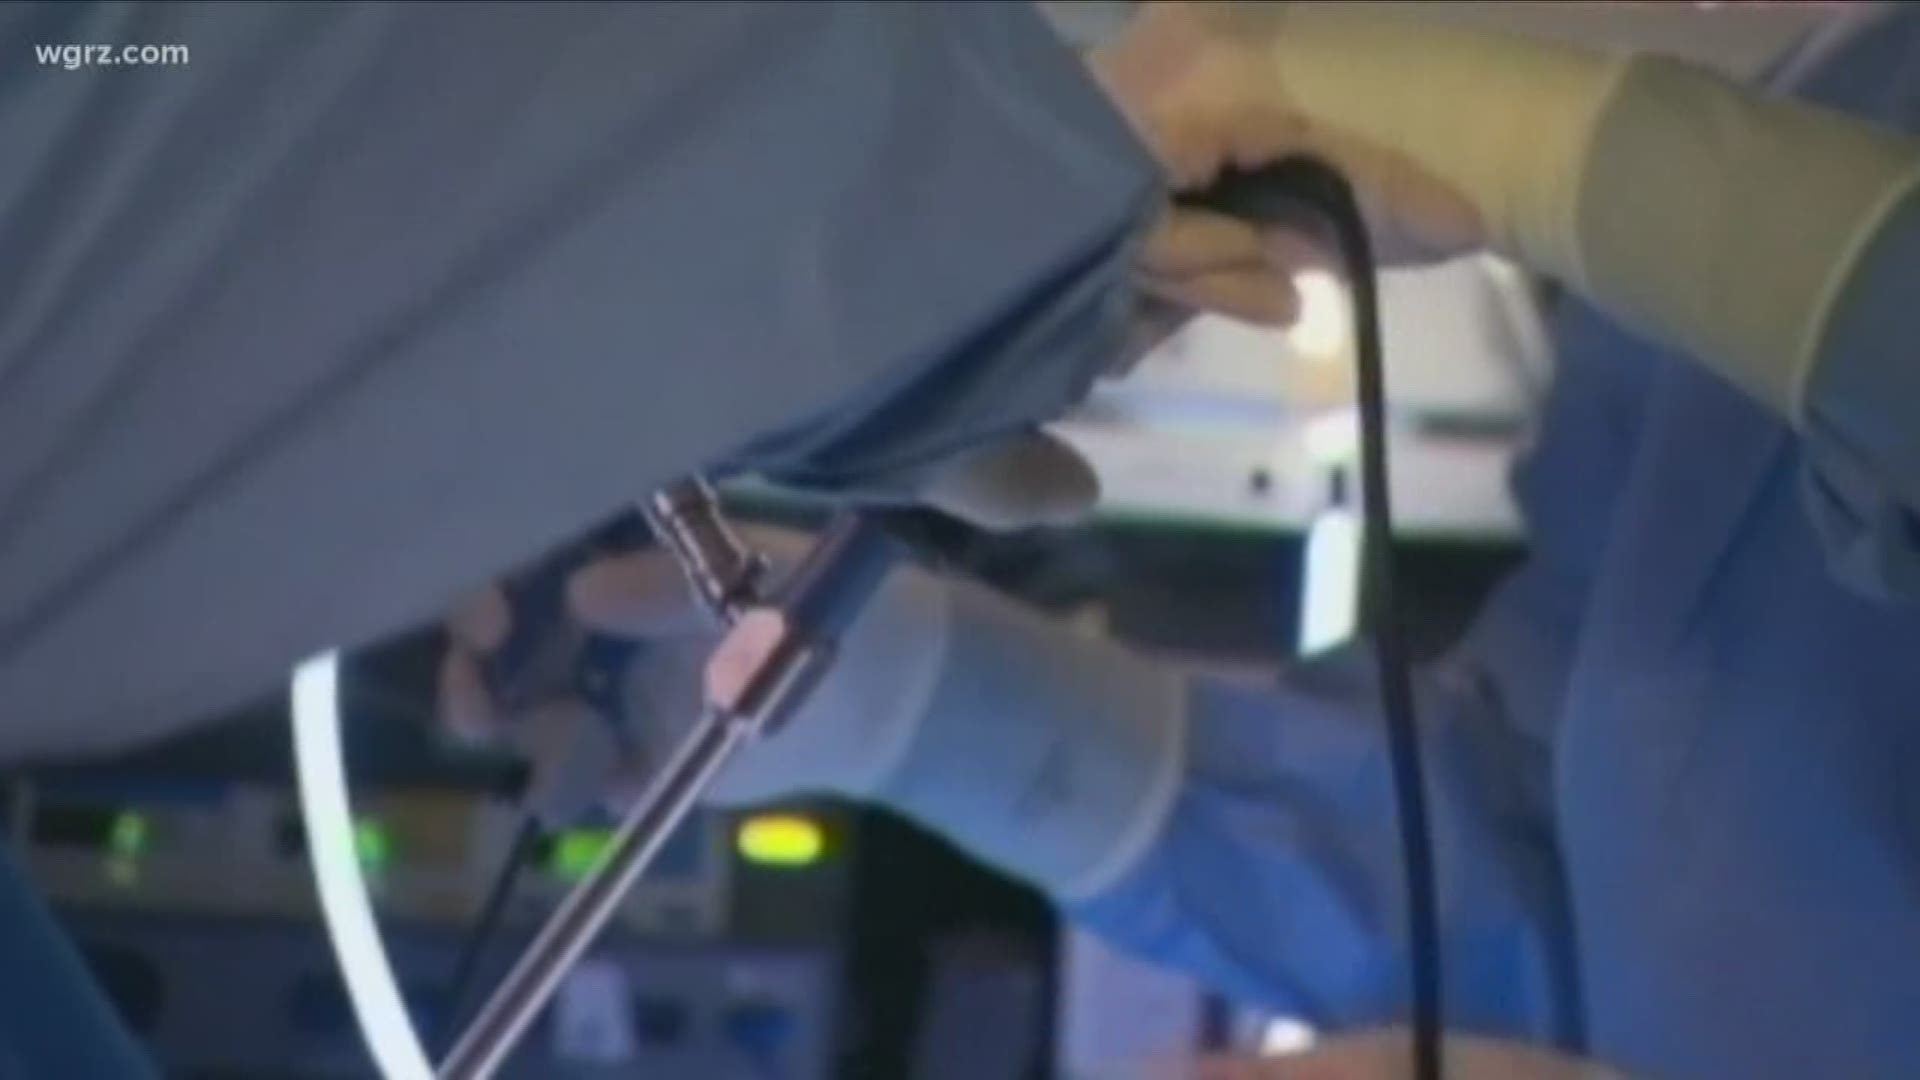 New technology being used to treat hernias